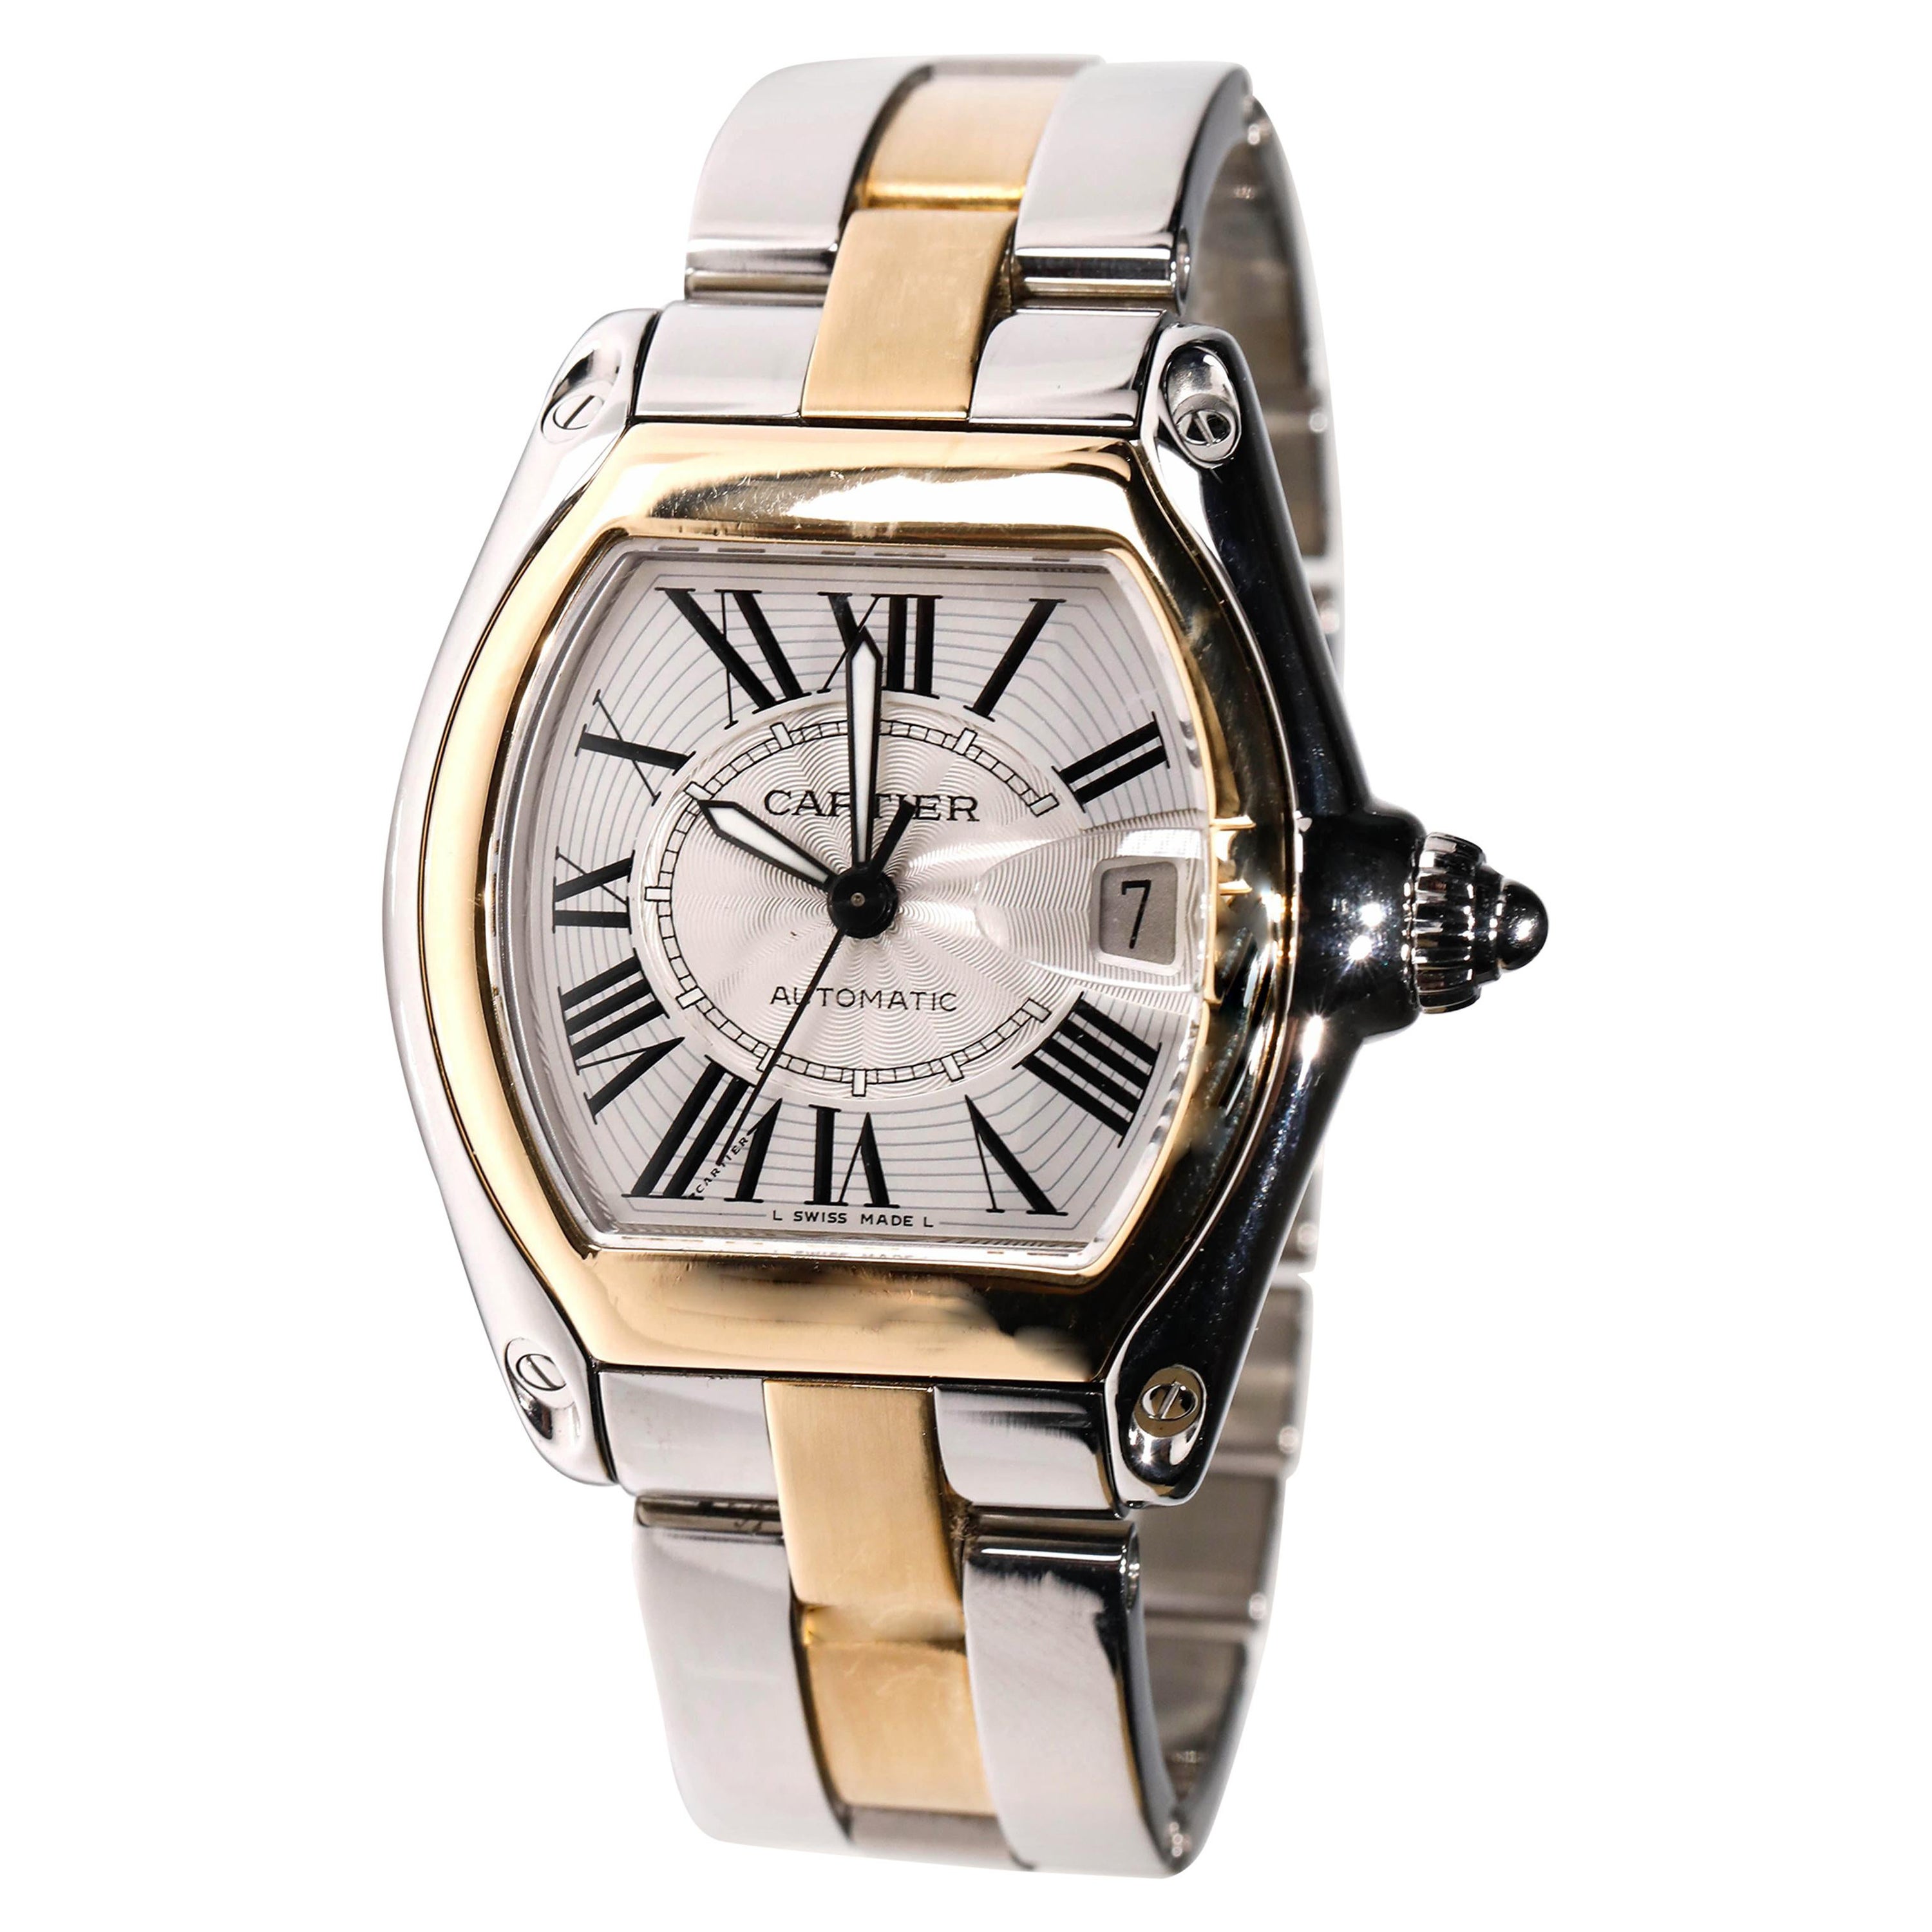 Cartier Two-Tone 18 Karat Gold and Stainless Roadster Large Size Mens Watch 2510 For Sale